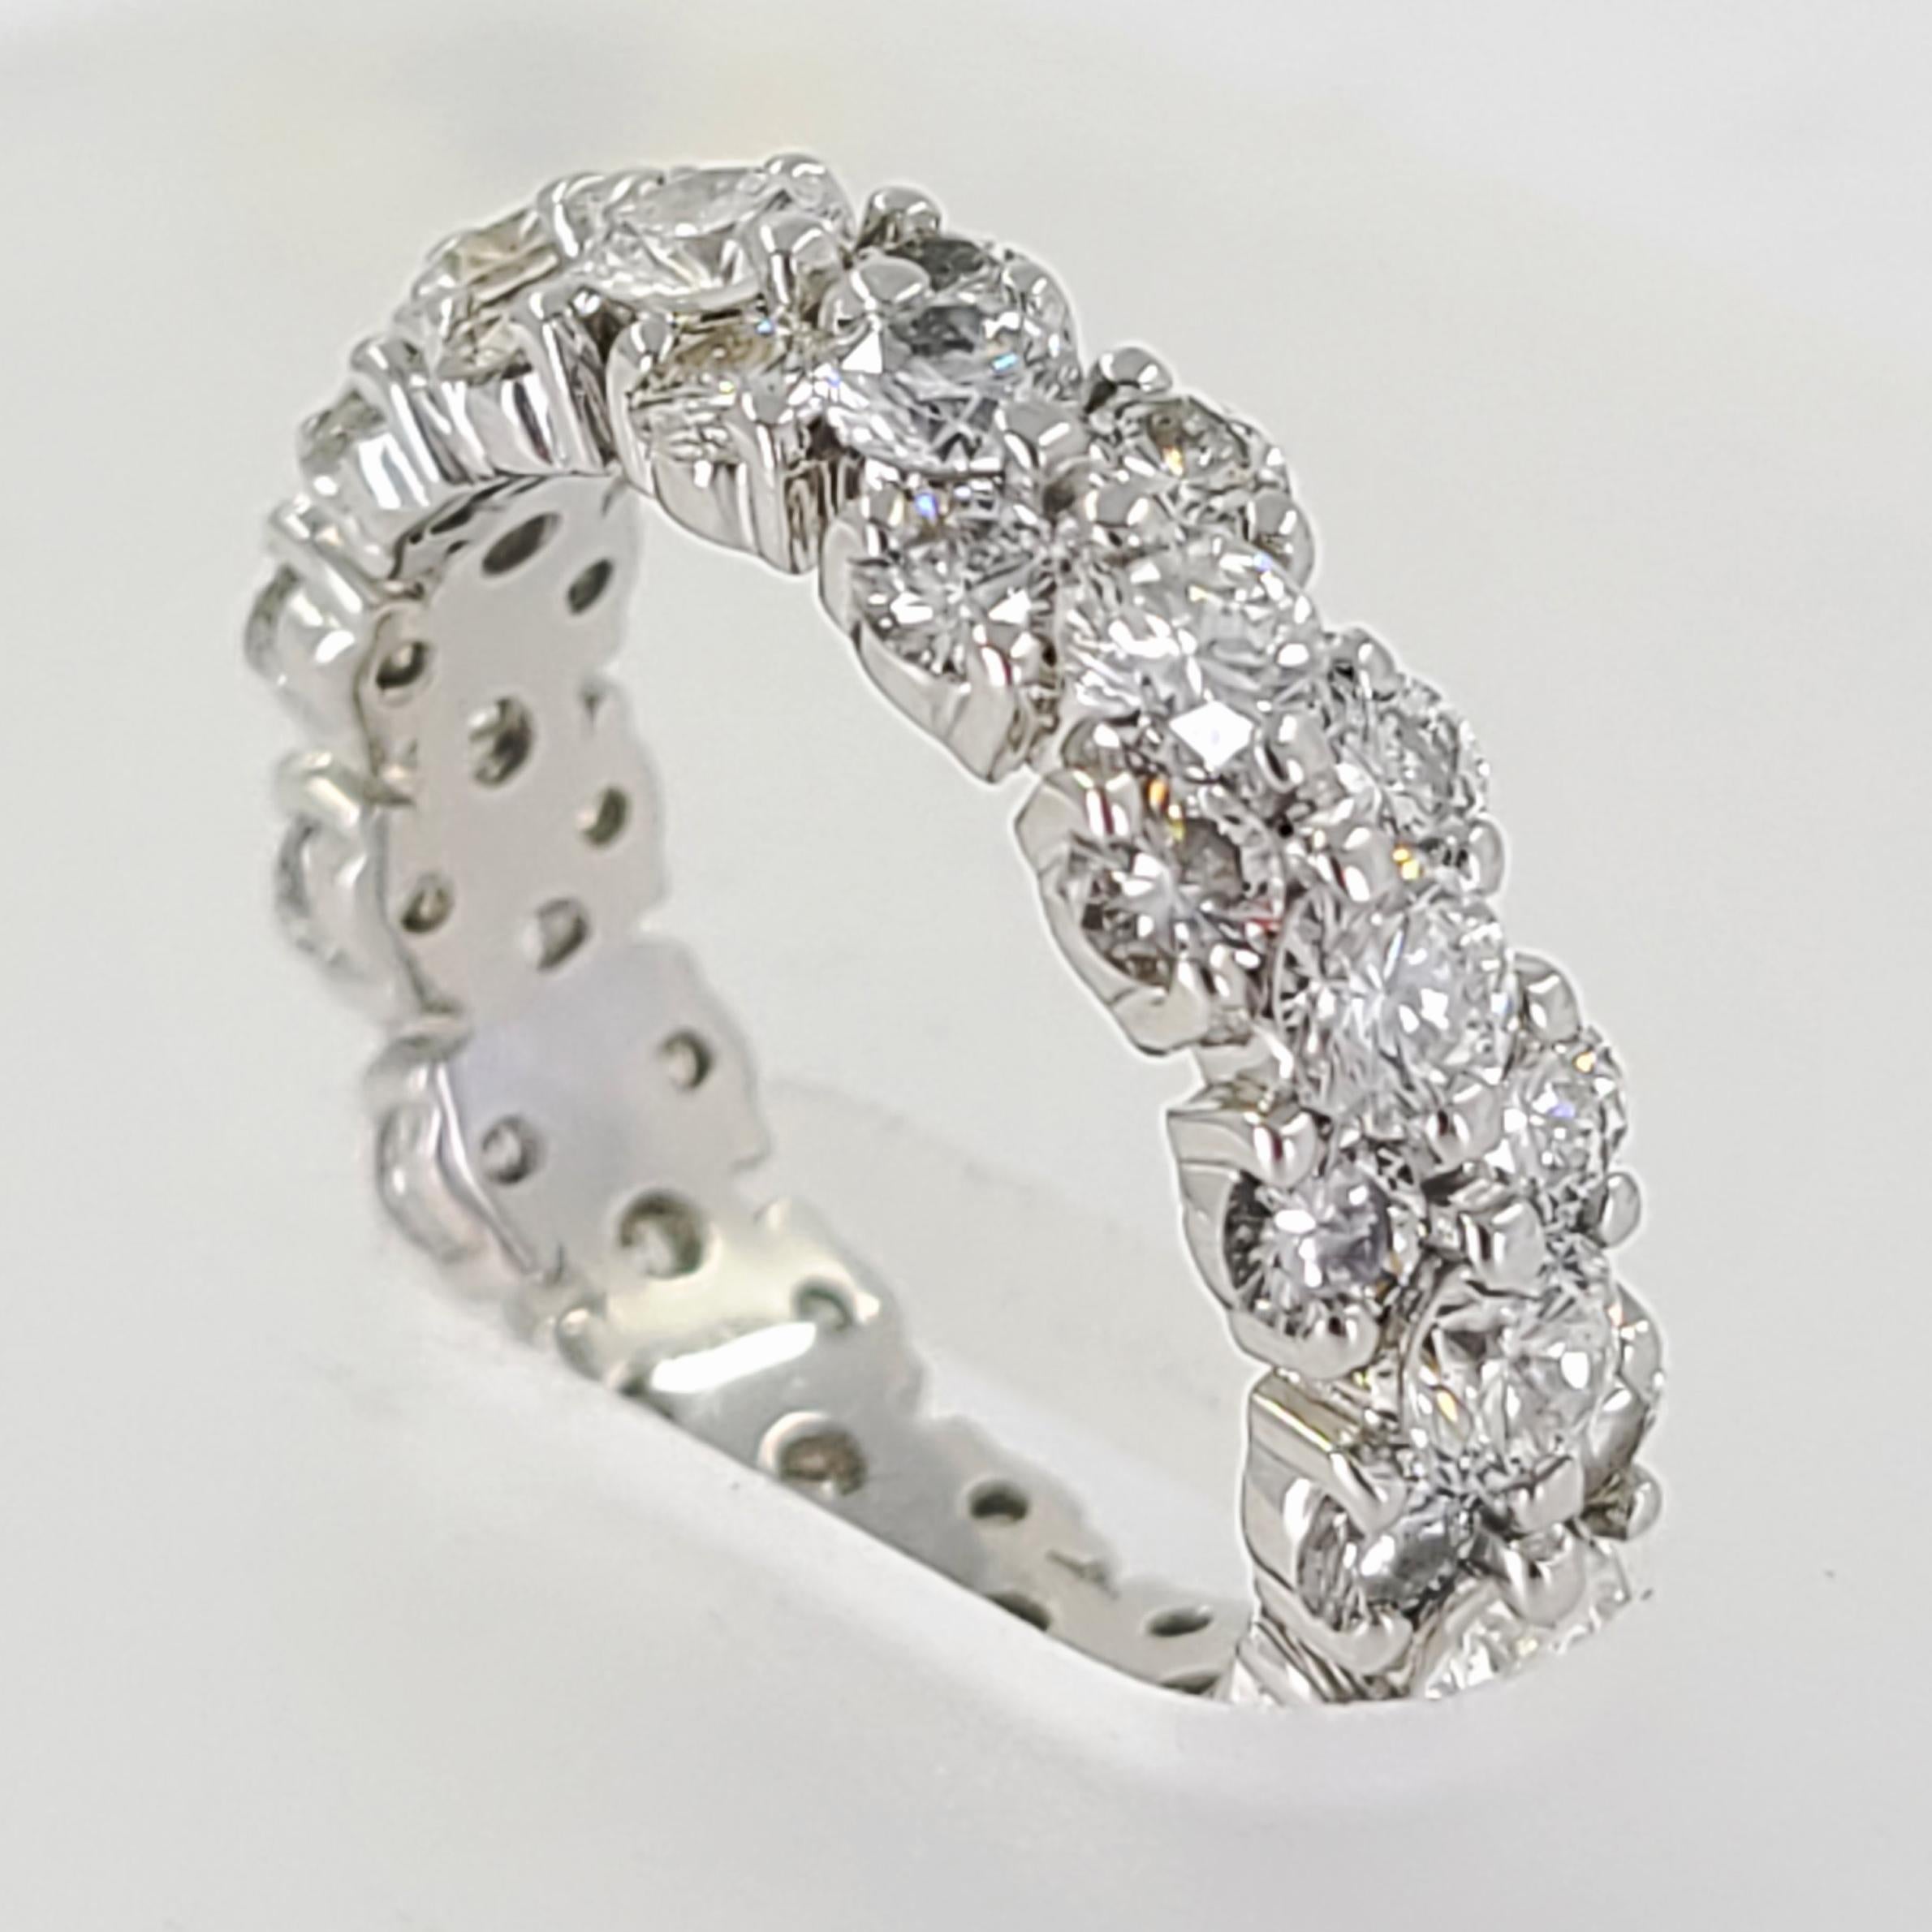 Platinum Diamond Eternity Band Featuring 3 Offset Stacked Shared-Prong Rows Of Round Brilliant Cut Diamonds. 45 Diamonds Of VS Clarity & G Color Total Approximately 3.05 Carats. Current Finger Size 5.5; Purchase Includes One Sizing Service. Note